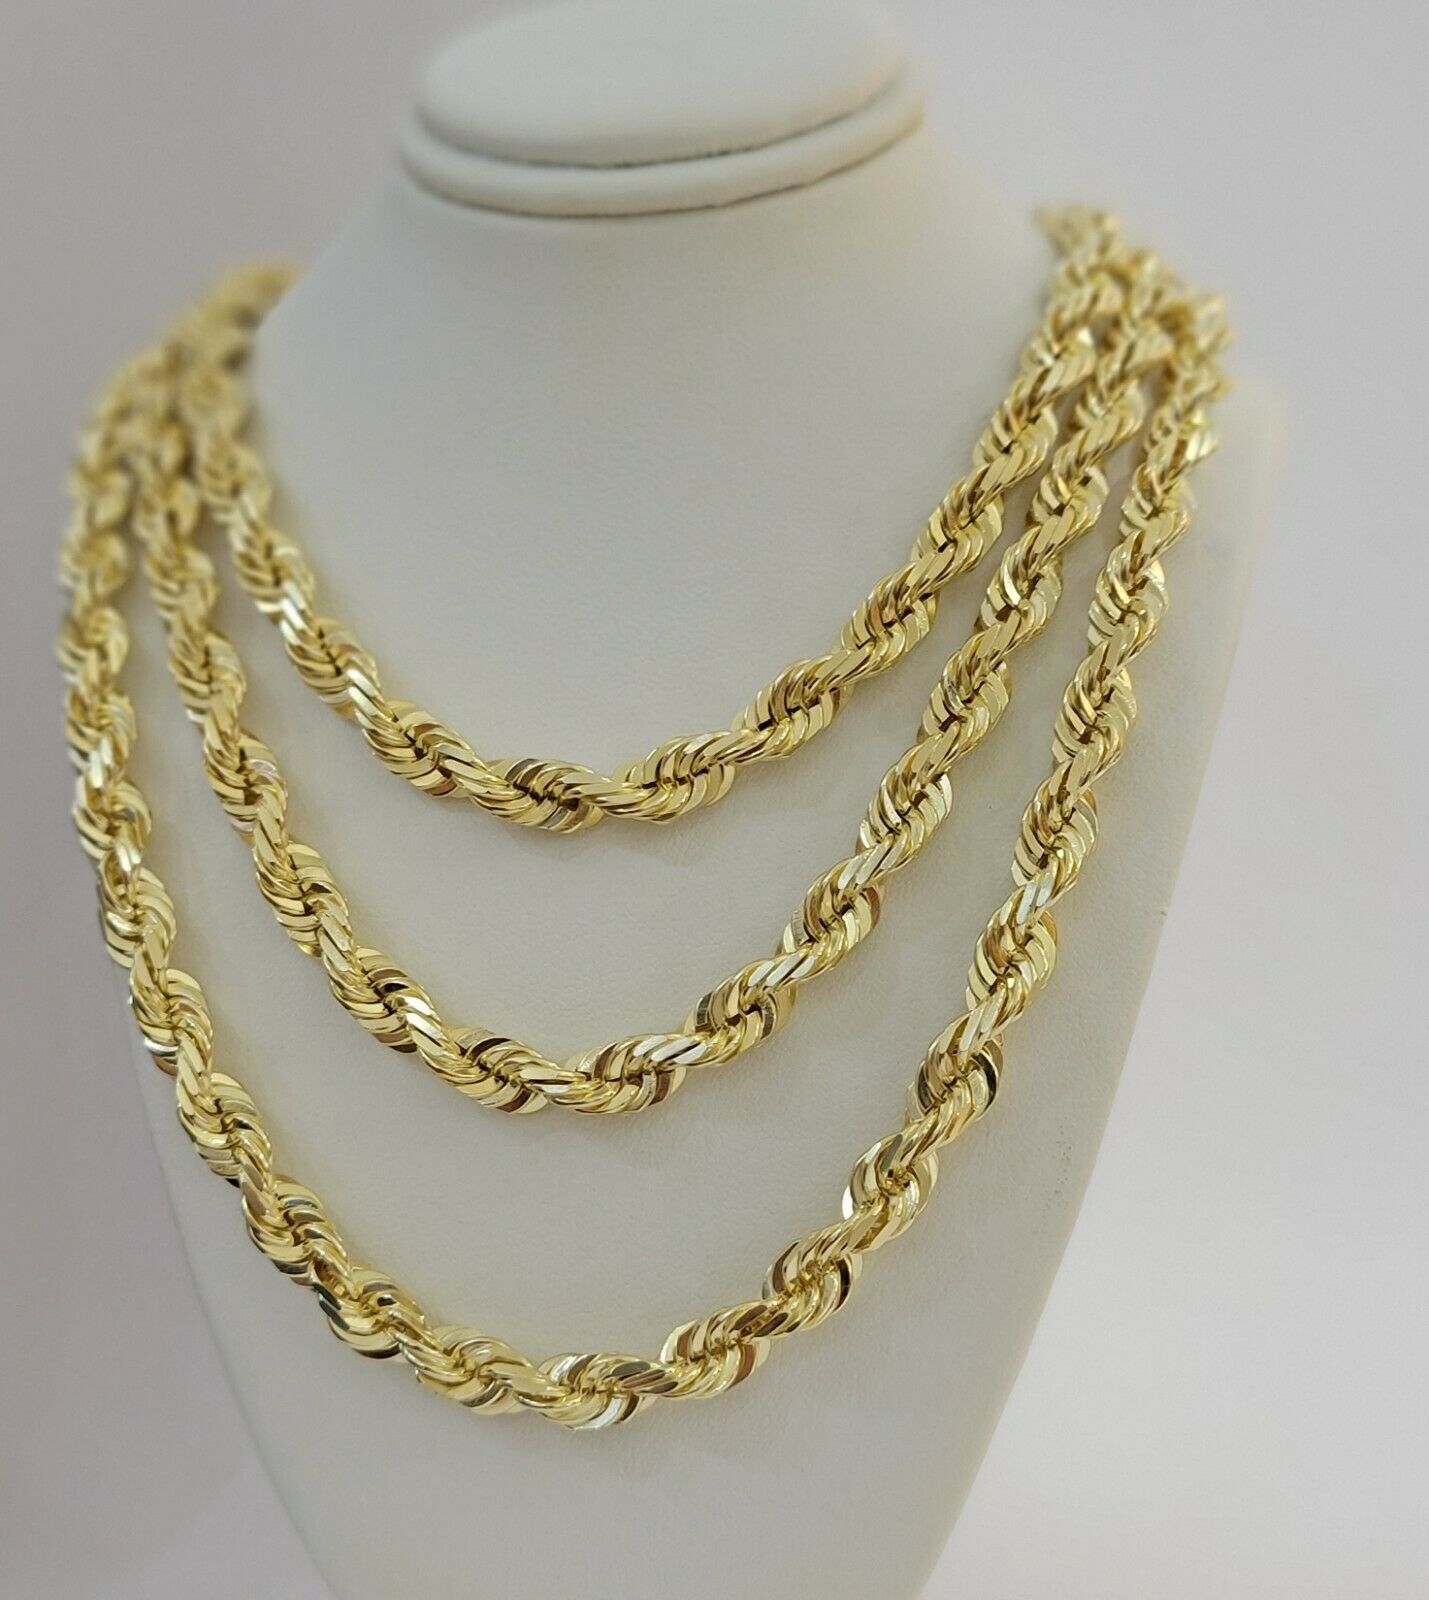 Real 10k Gold Solid Rope Chain Mens Necklace 8mm 24" Inch Diamond cuts 10kt